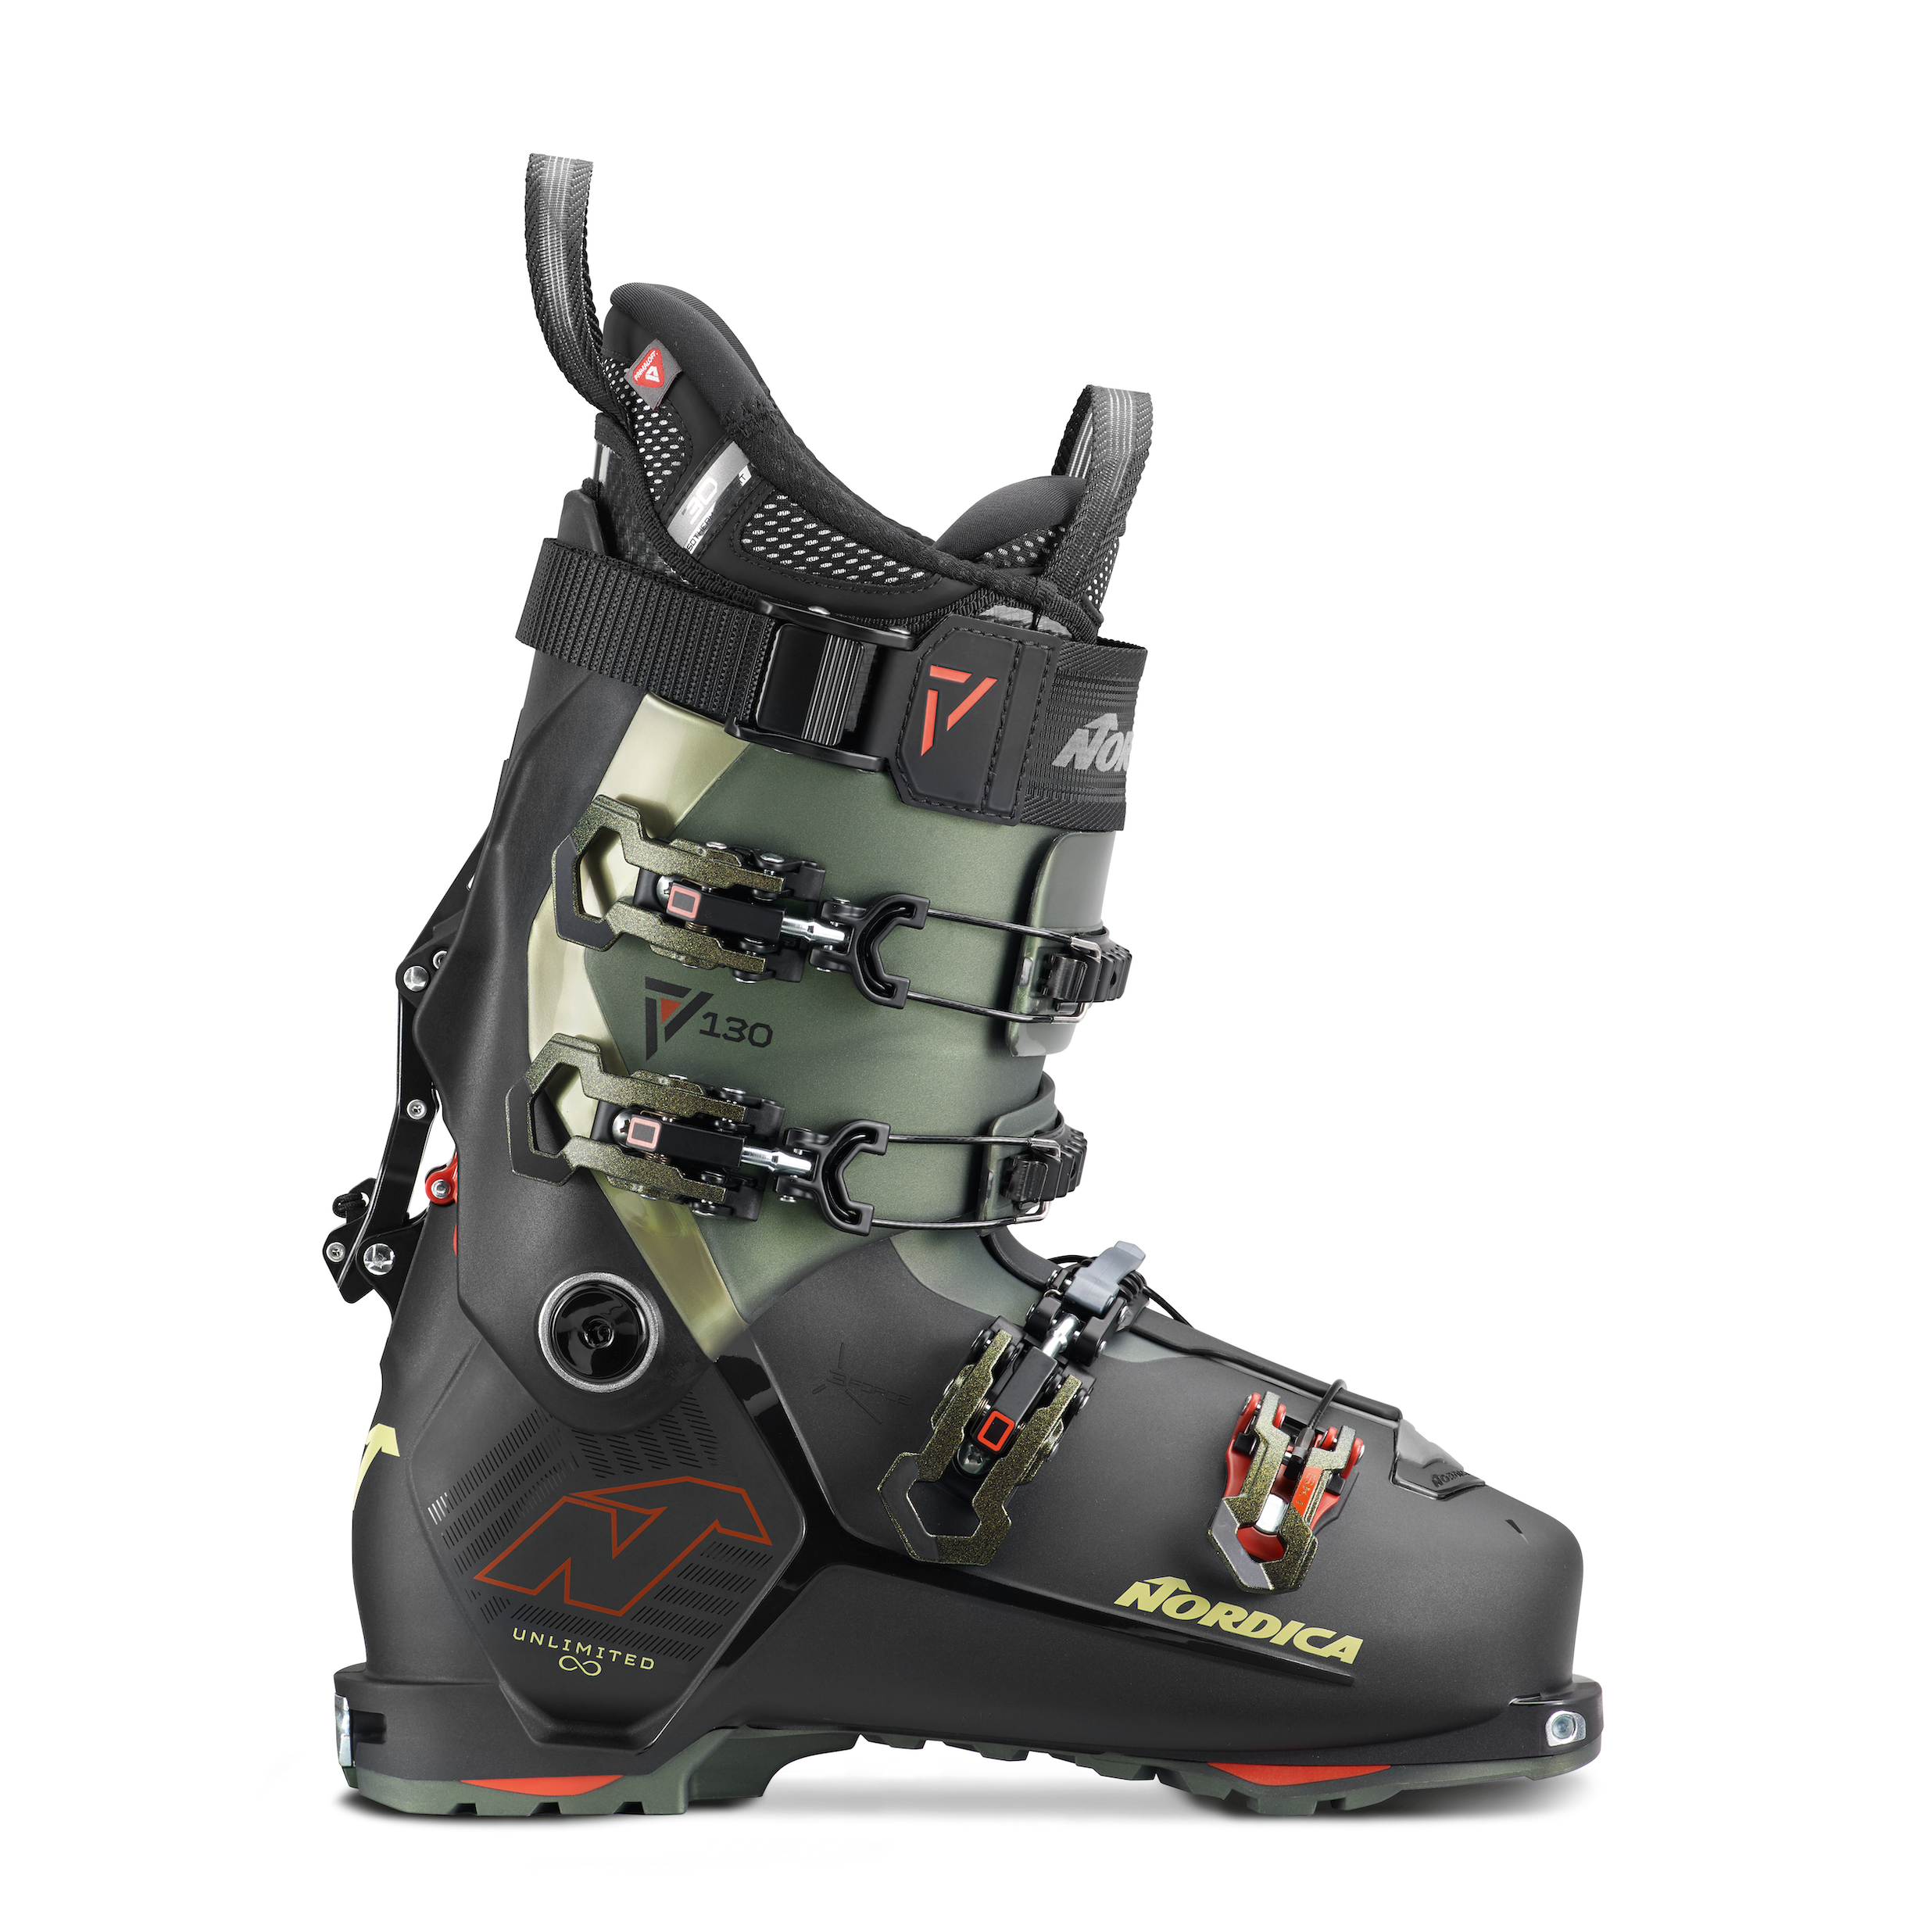 Men's Nordica Unlimited 130 DYN ski boot, 2 shades of green and black with red accents. Shimmery green on buckles.